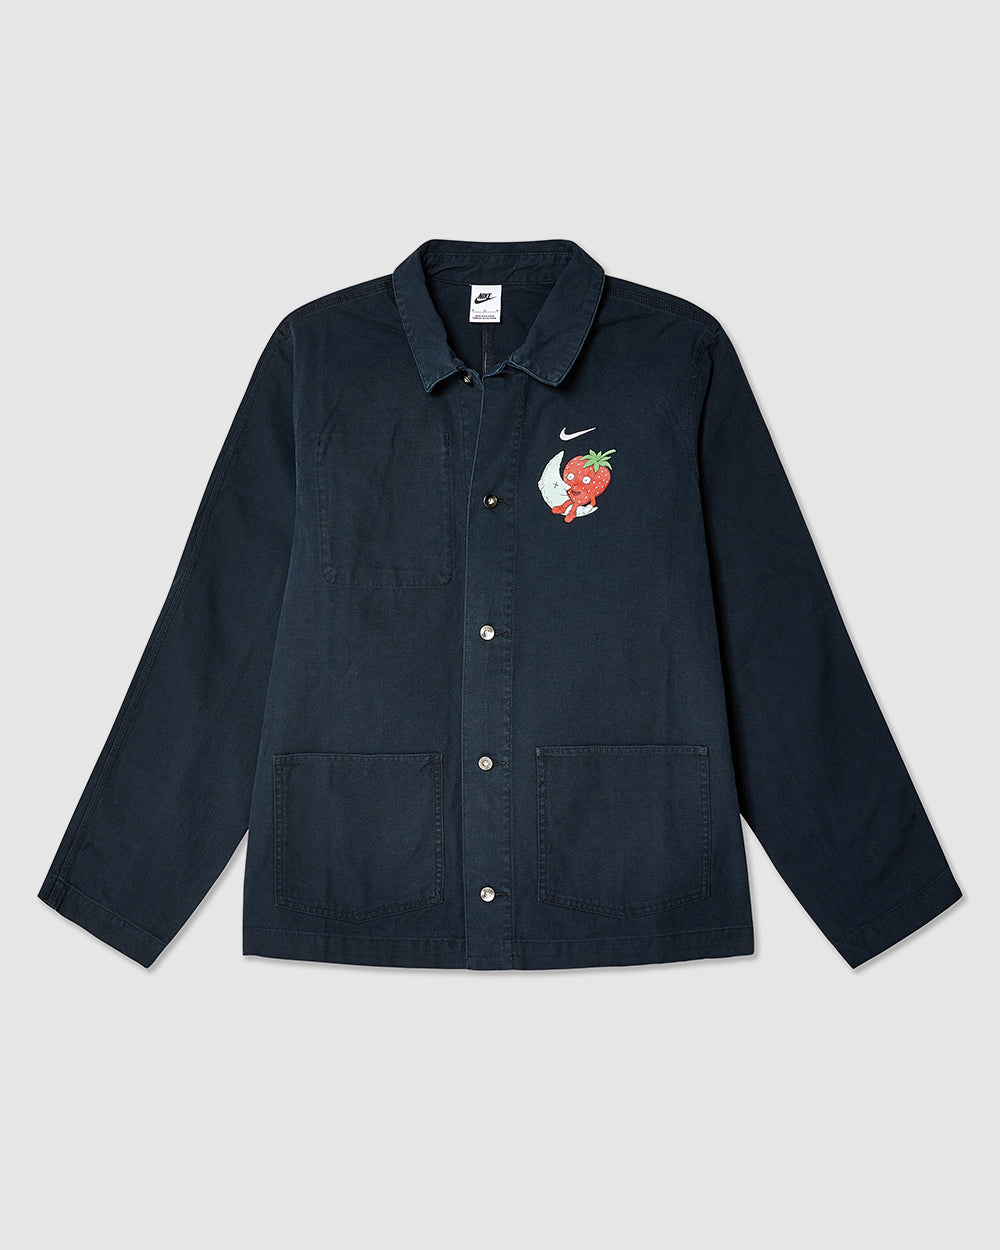 Product shot of a navy jacket